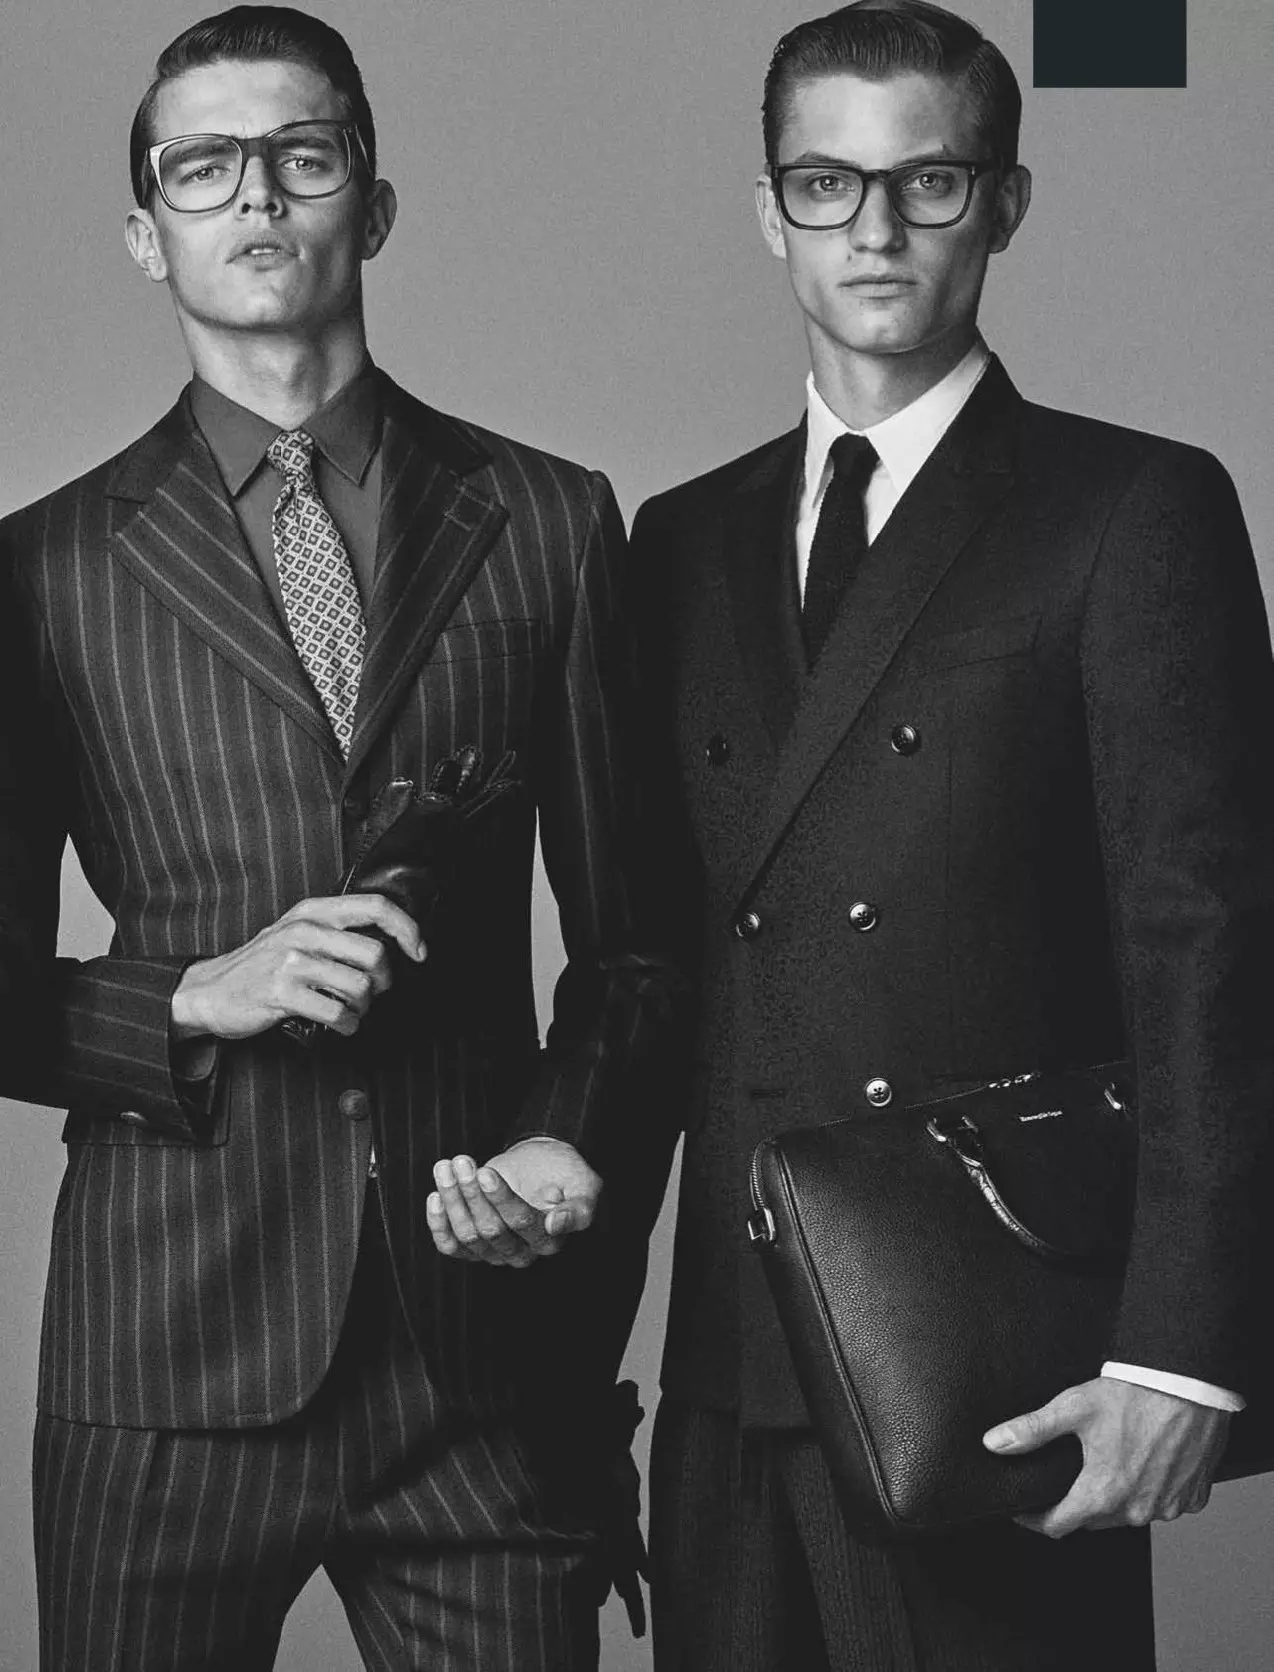 GQ UK septimber 2016: The GQ Collections Photographs by Giampaolo Sgura Styling by Luke Day